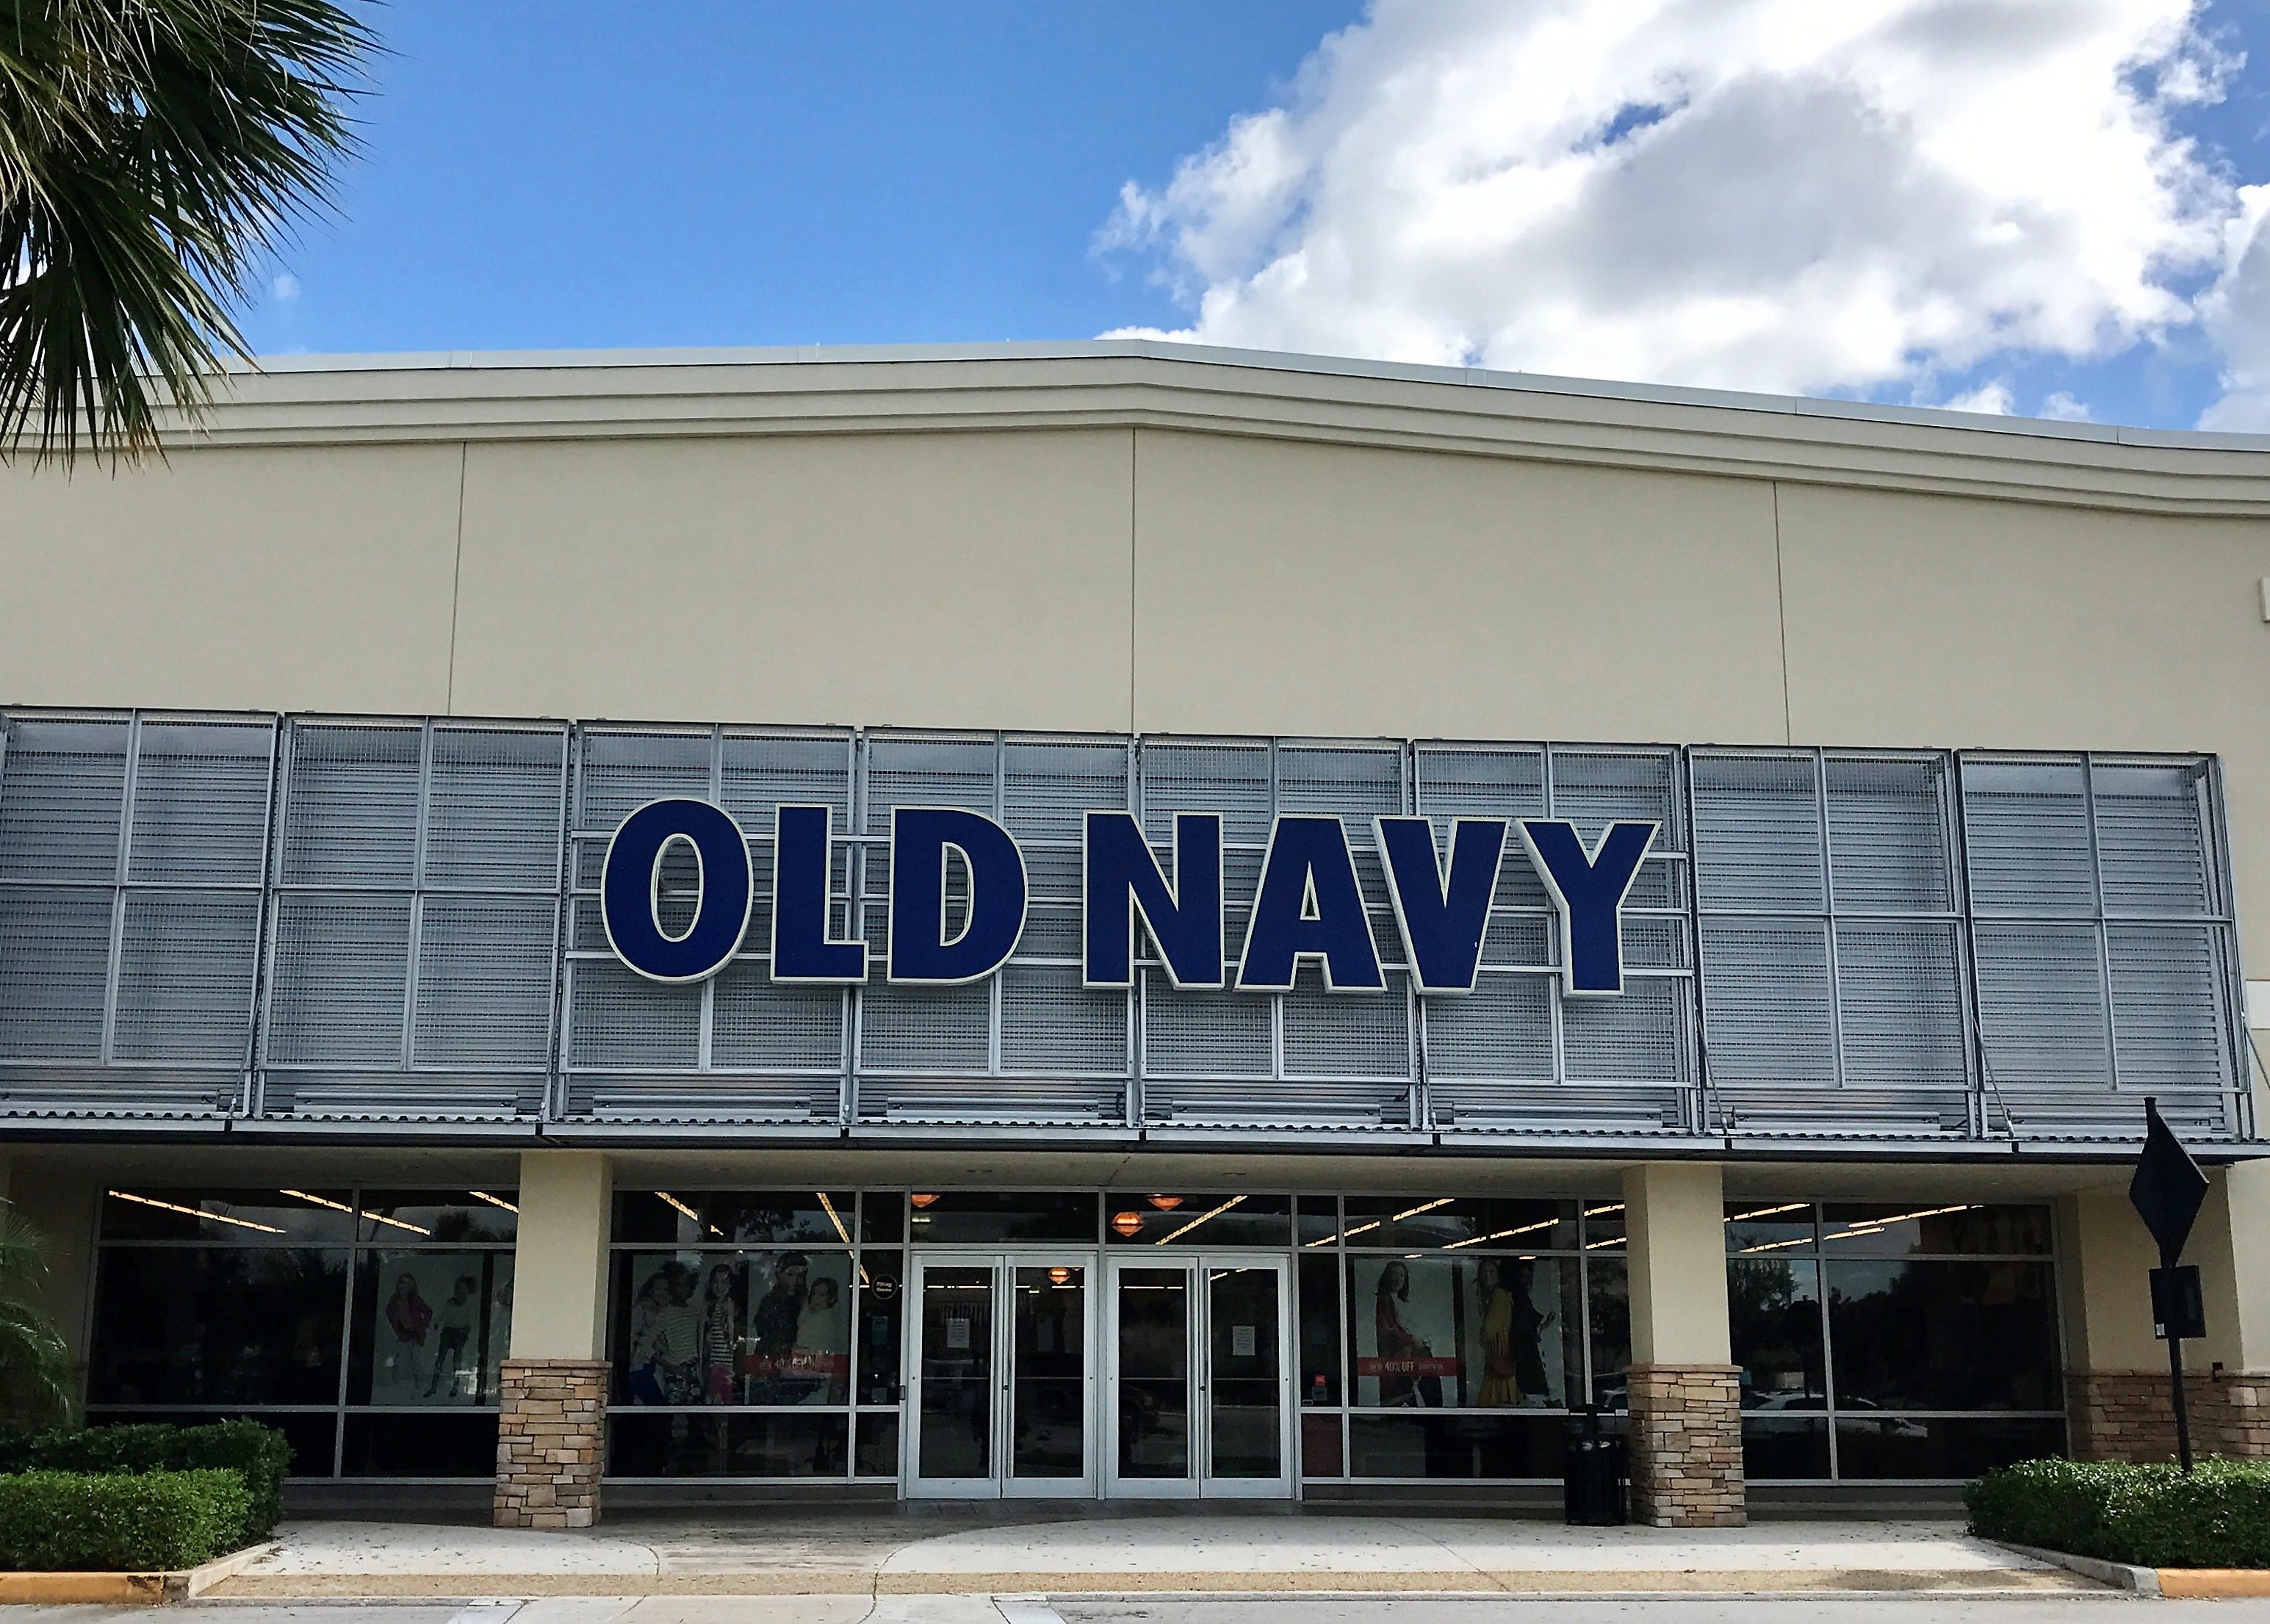 Need flip flops? Get some for $1 at Old Navy June 24